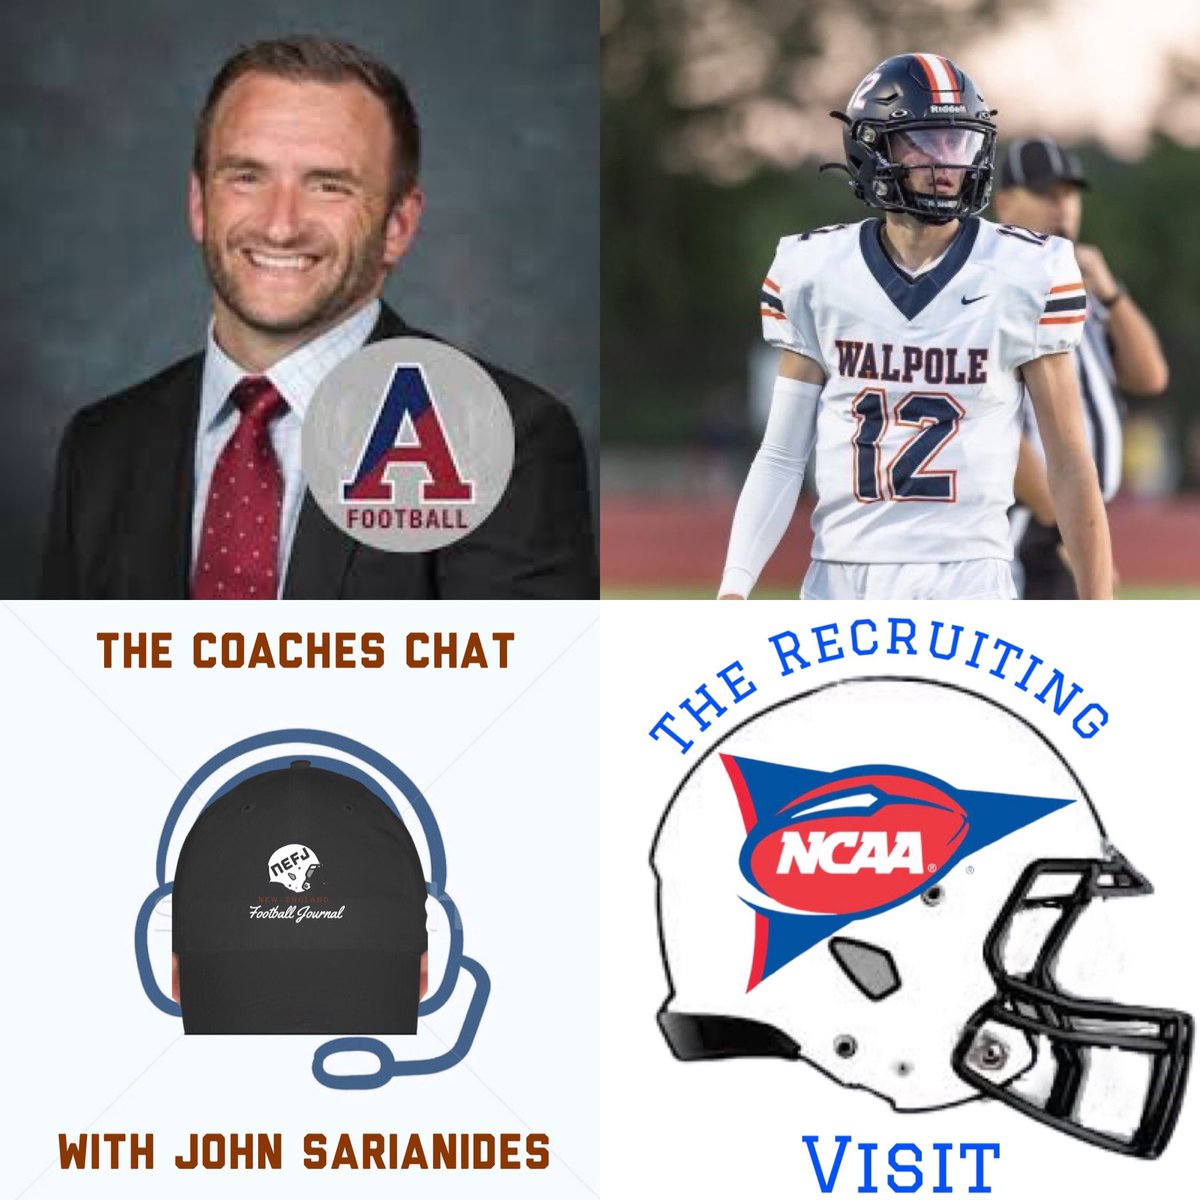 Another great week of football talk. Joining me tonight at 8 pm on the Coaches Chat is @JonathanWholley from @AOF_Football talk about Monday’s showcase. Walpole quarterback @NoahMackenzie12 joins me at 8:30 pm on the Recruiting Visit. Tune in line on X, Facebook, Twitch and our…